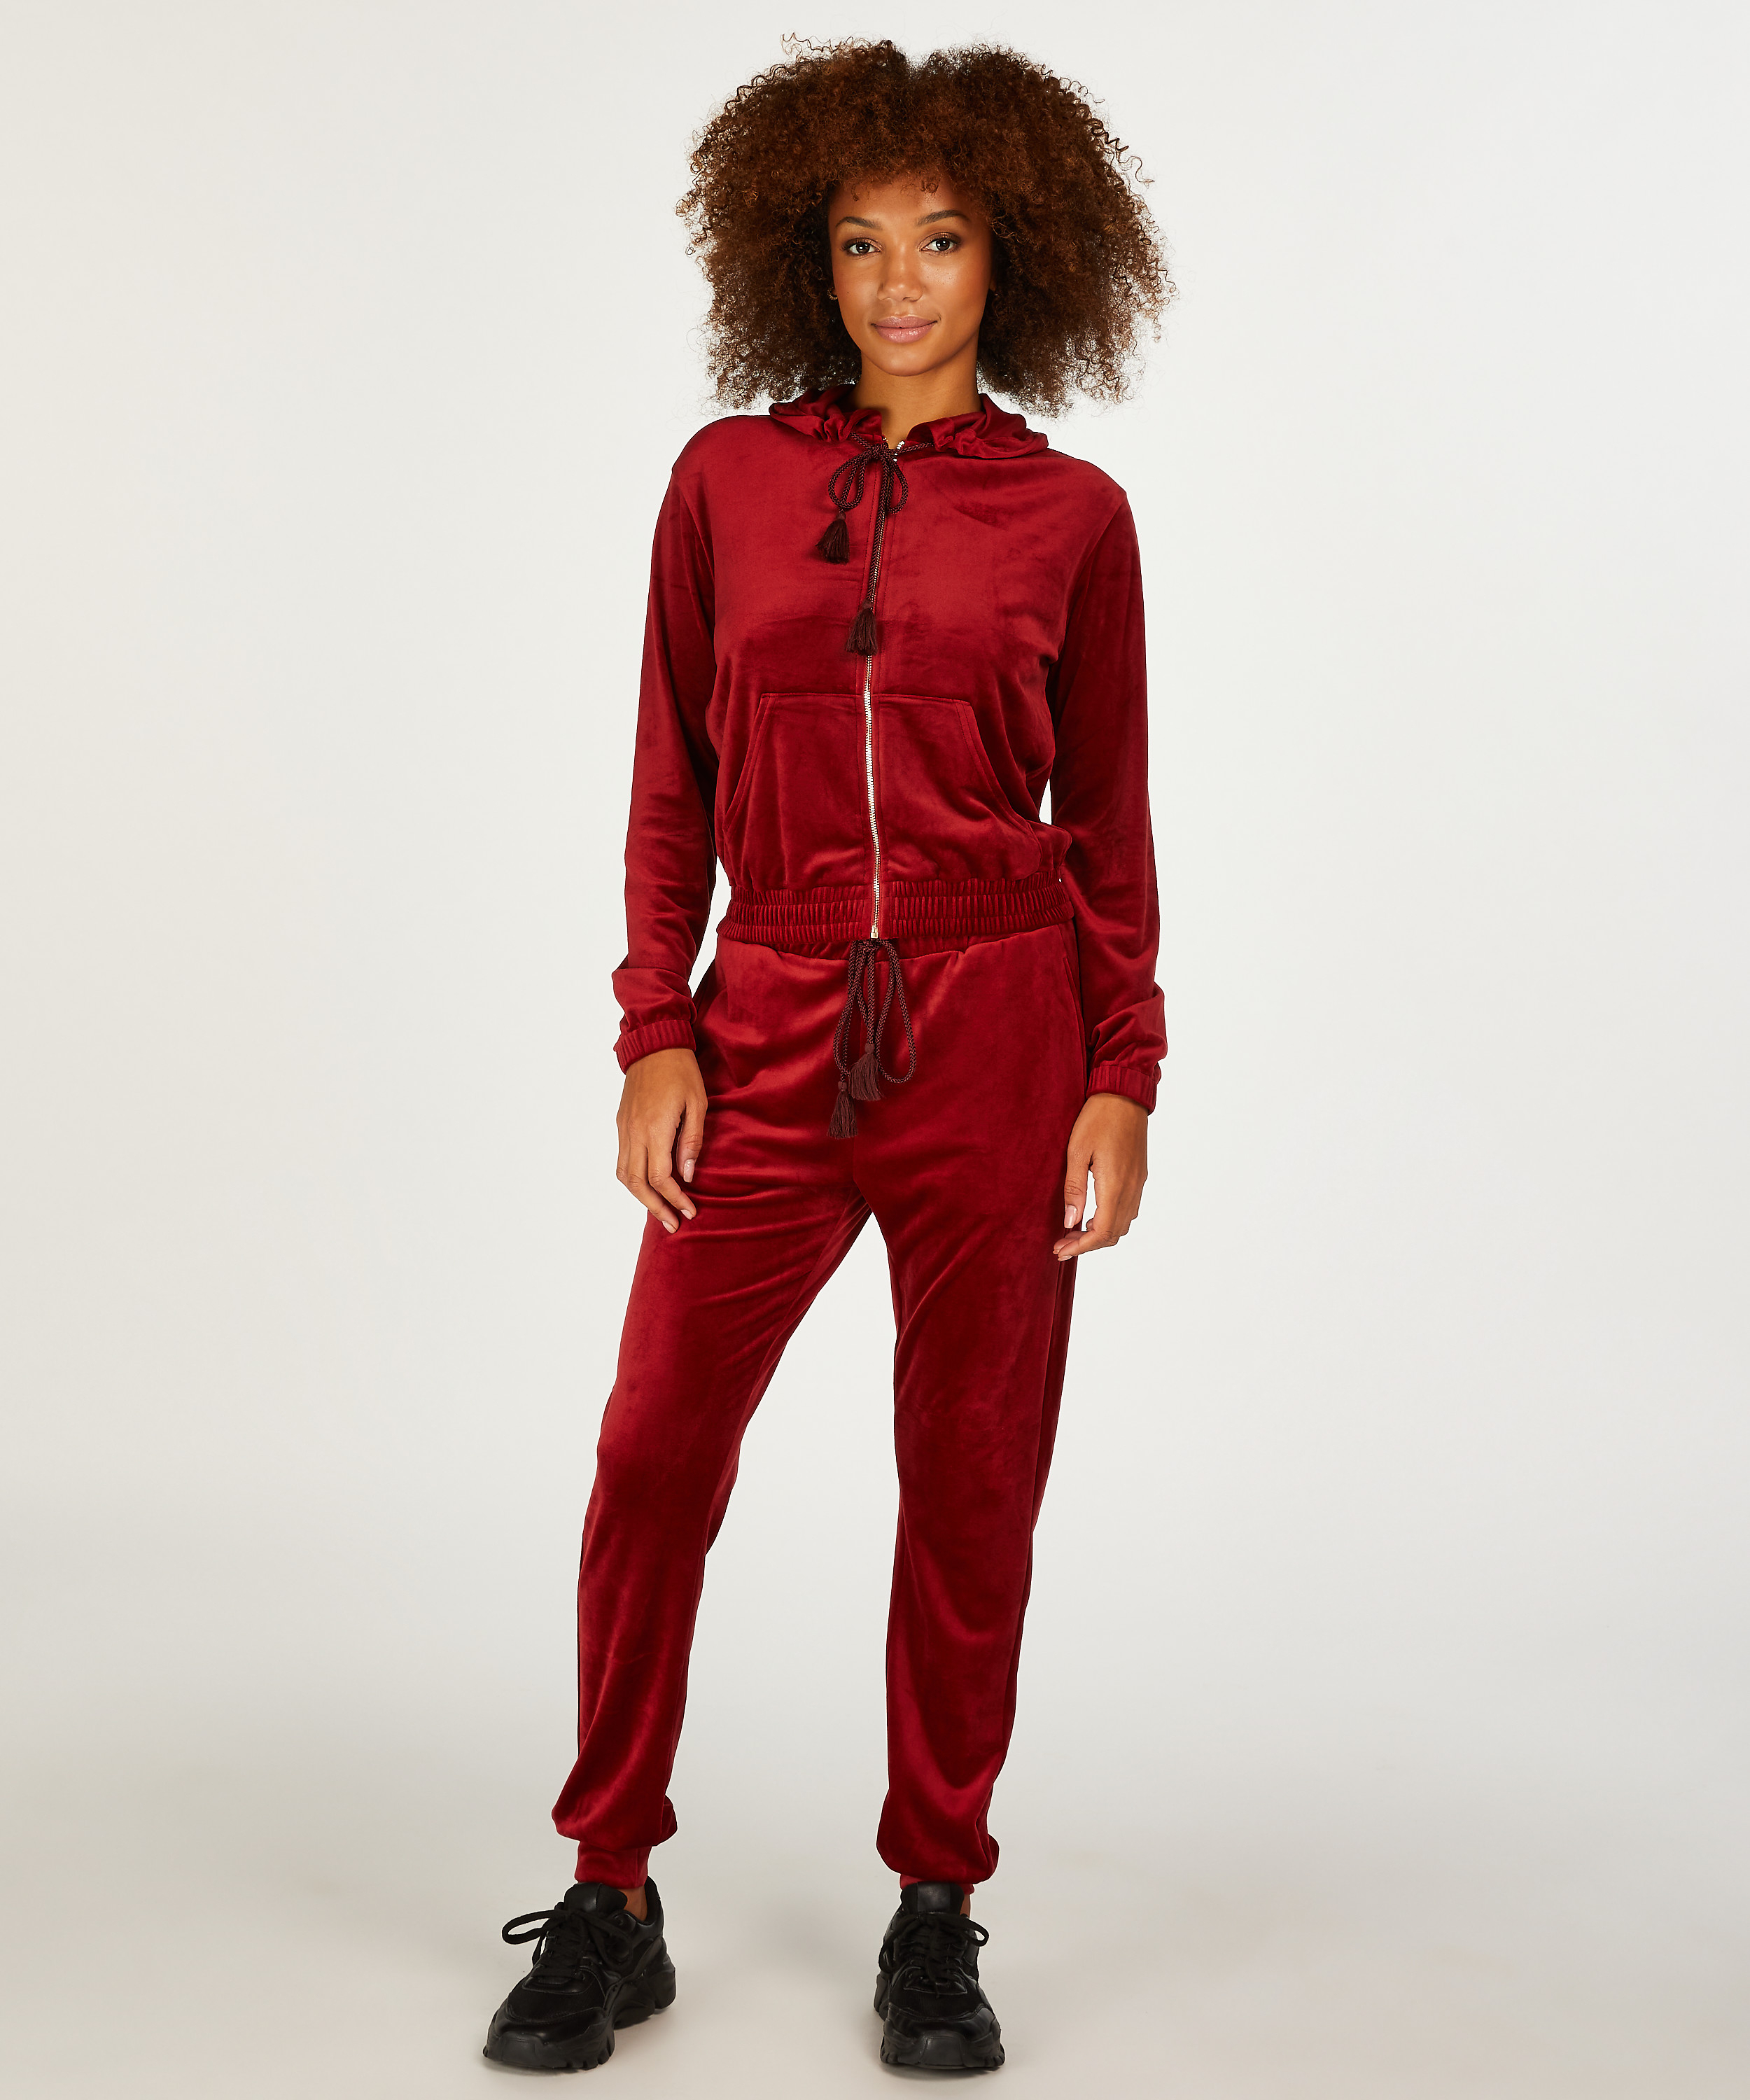 Tall Velours Jogging Bottoms, Red, main